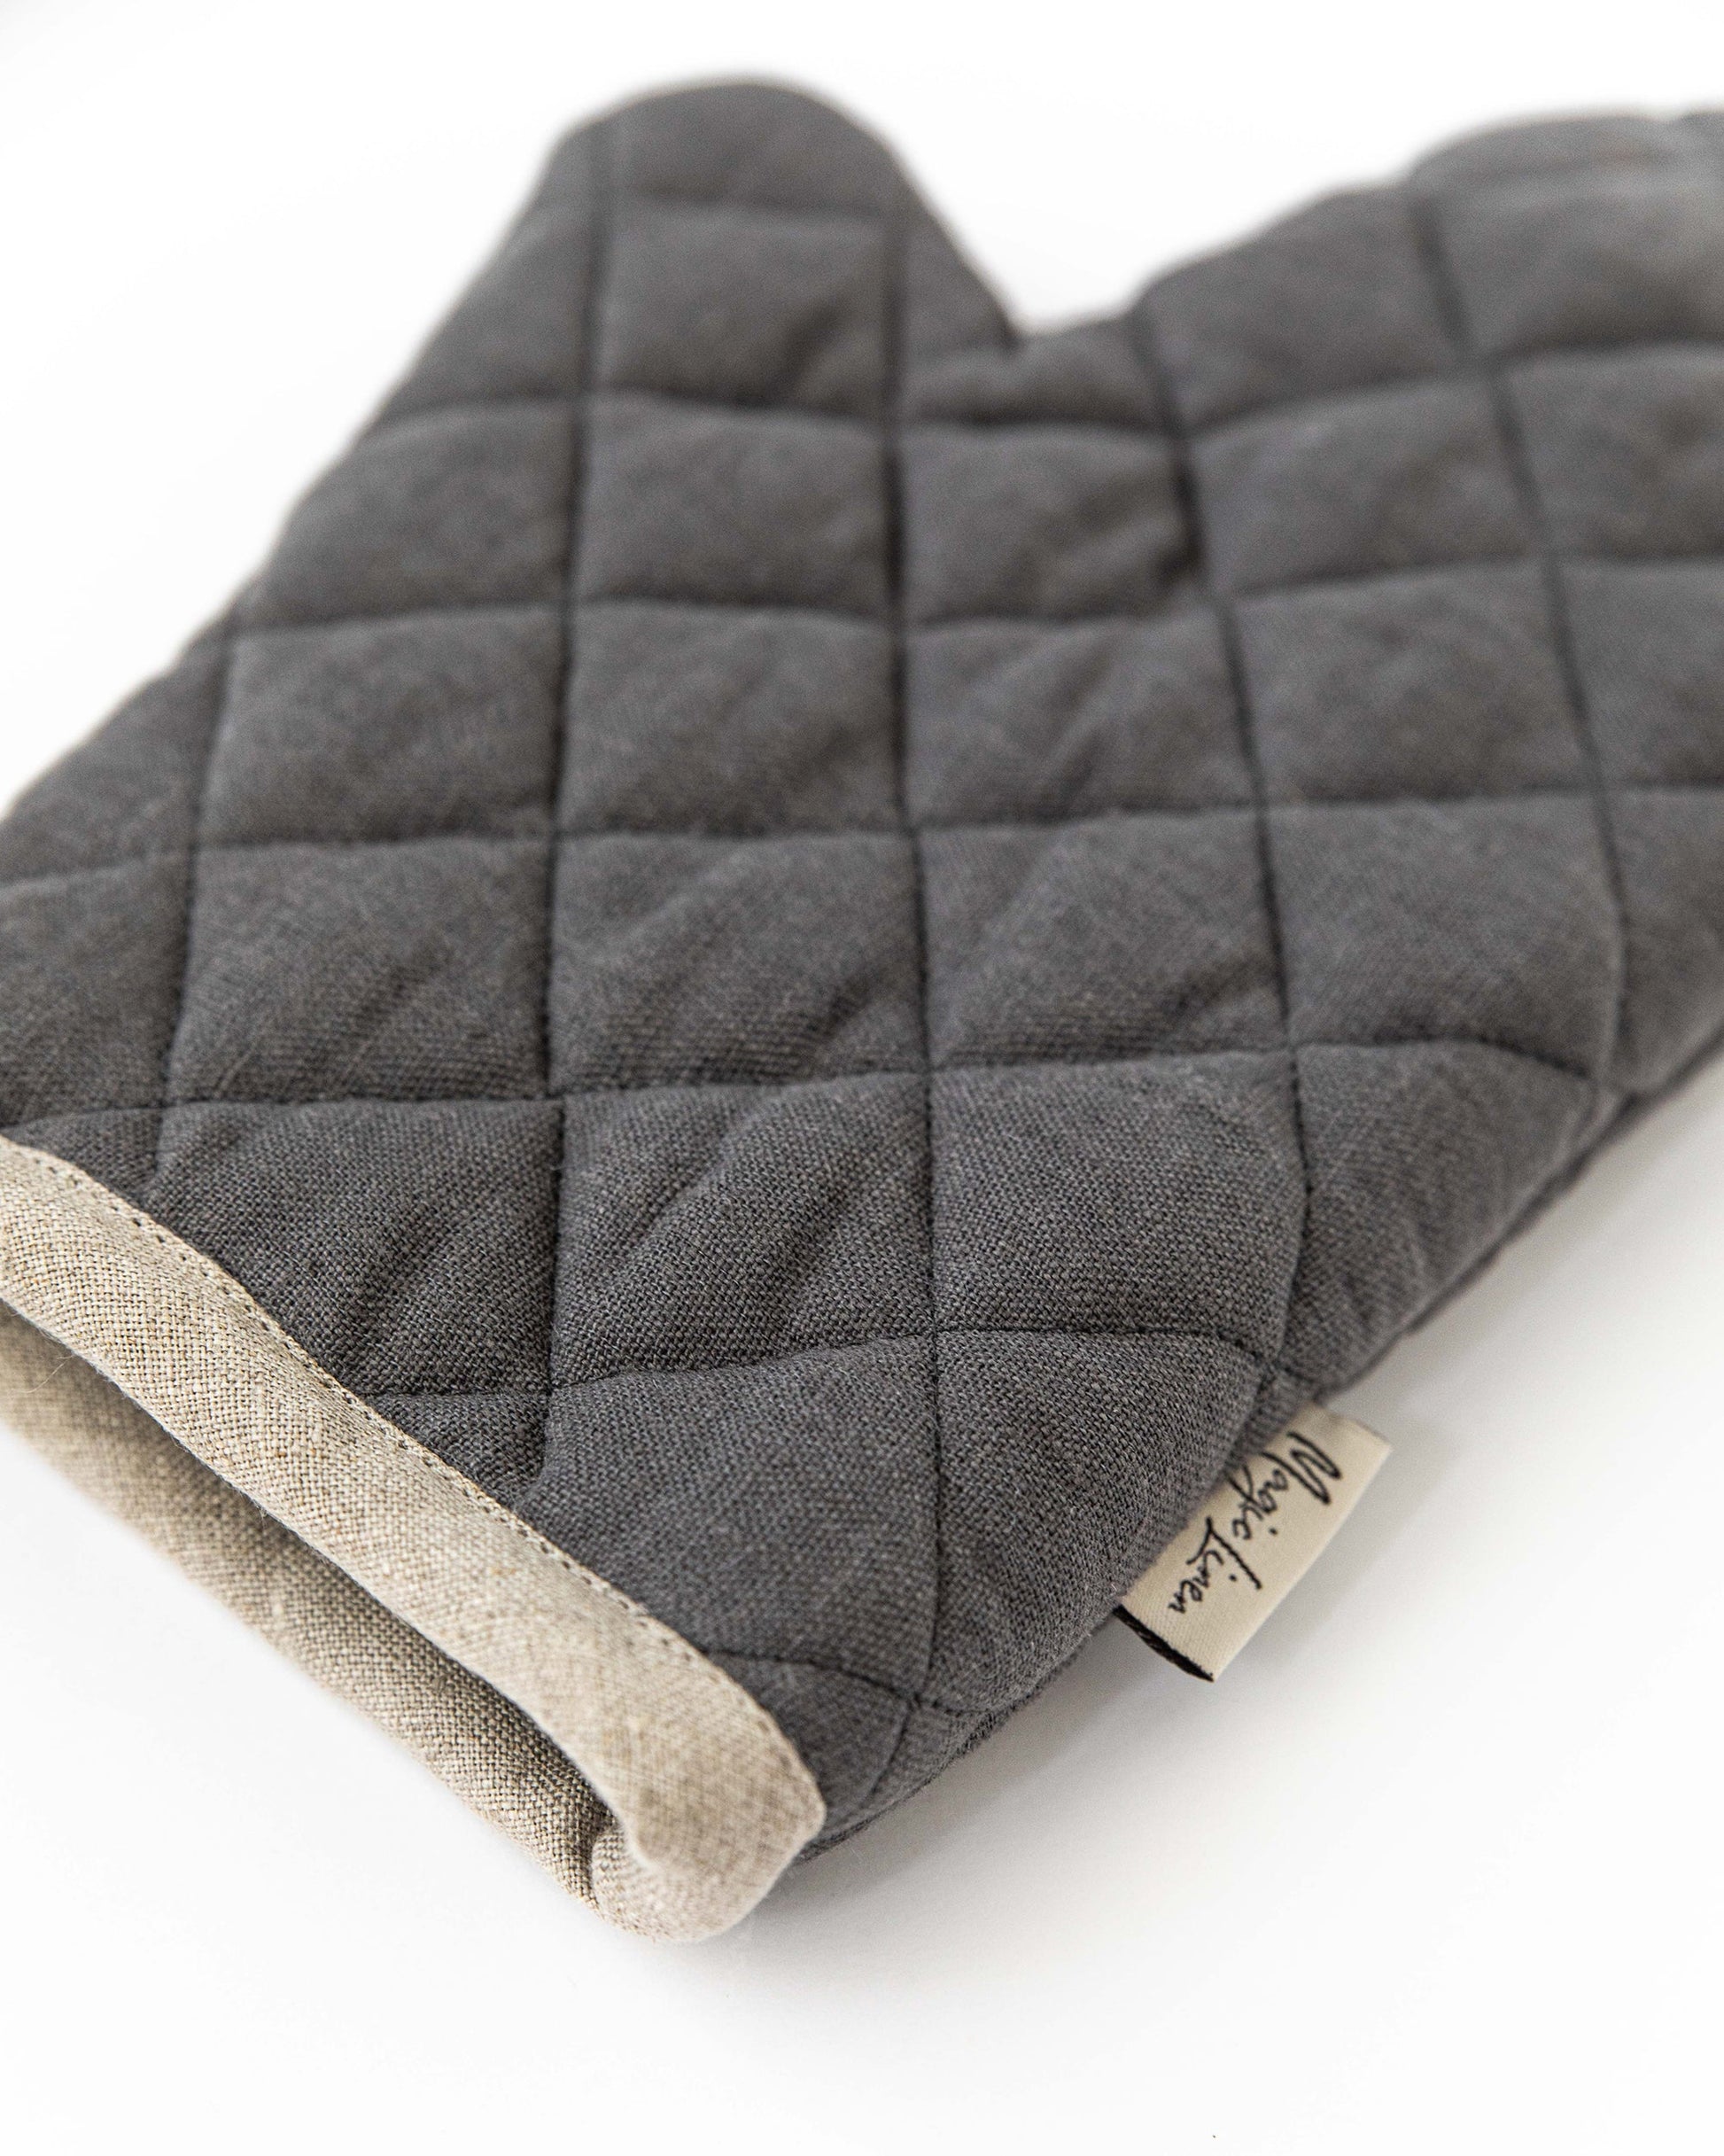 MagicLinen Linen Oven Mitt in Charcoal Gray at Urban Outfitters